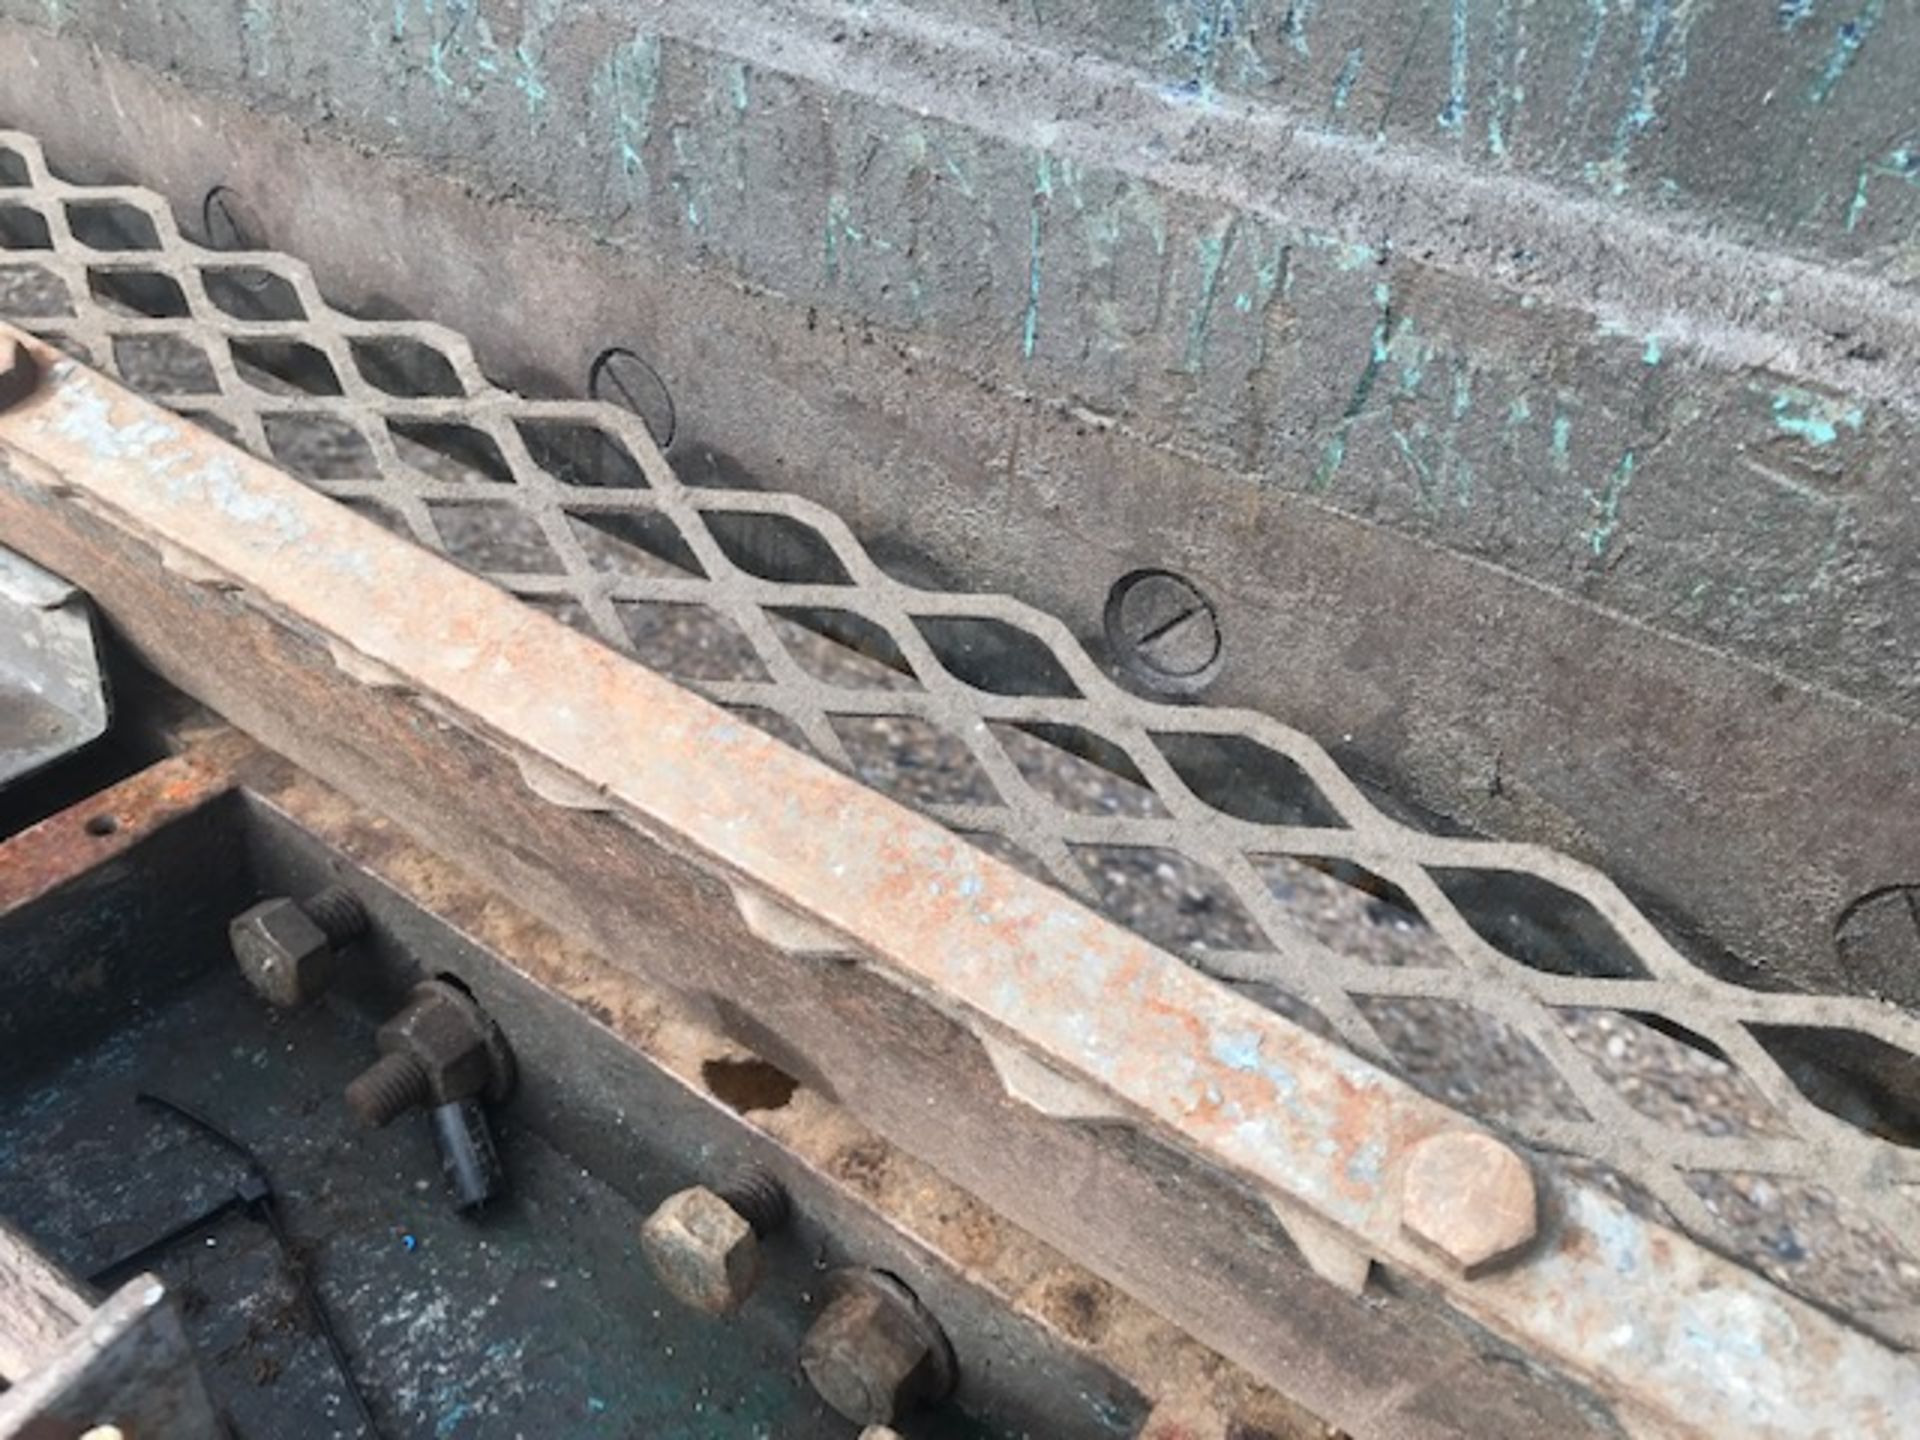 EDWARDS 3 PHASE GUILLOTENE, 8FT BLADE, WORKING WHEN RECENTLY REMOVED. - Image 11 of 11